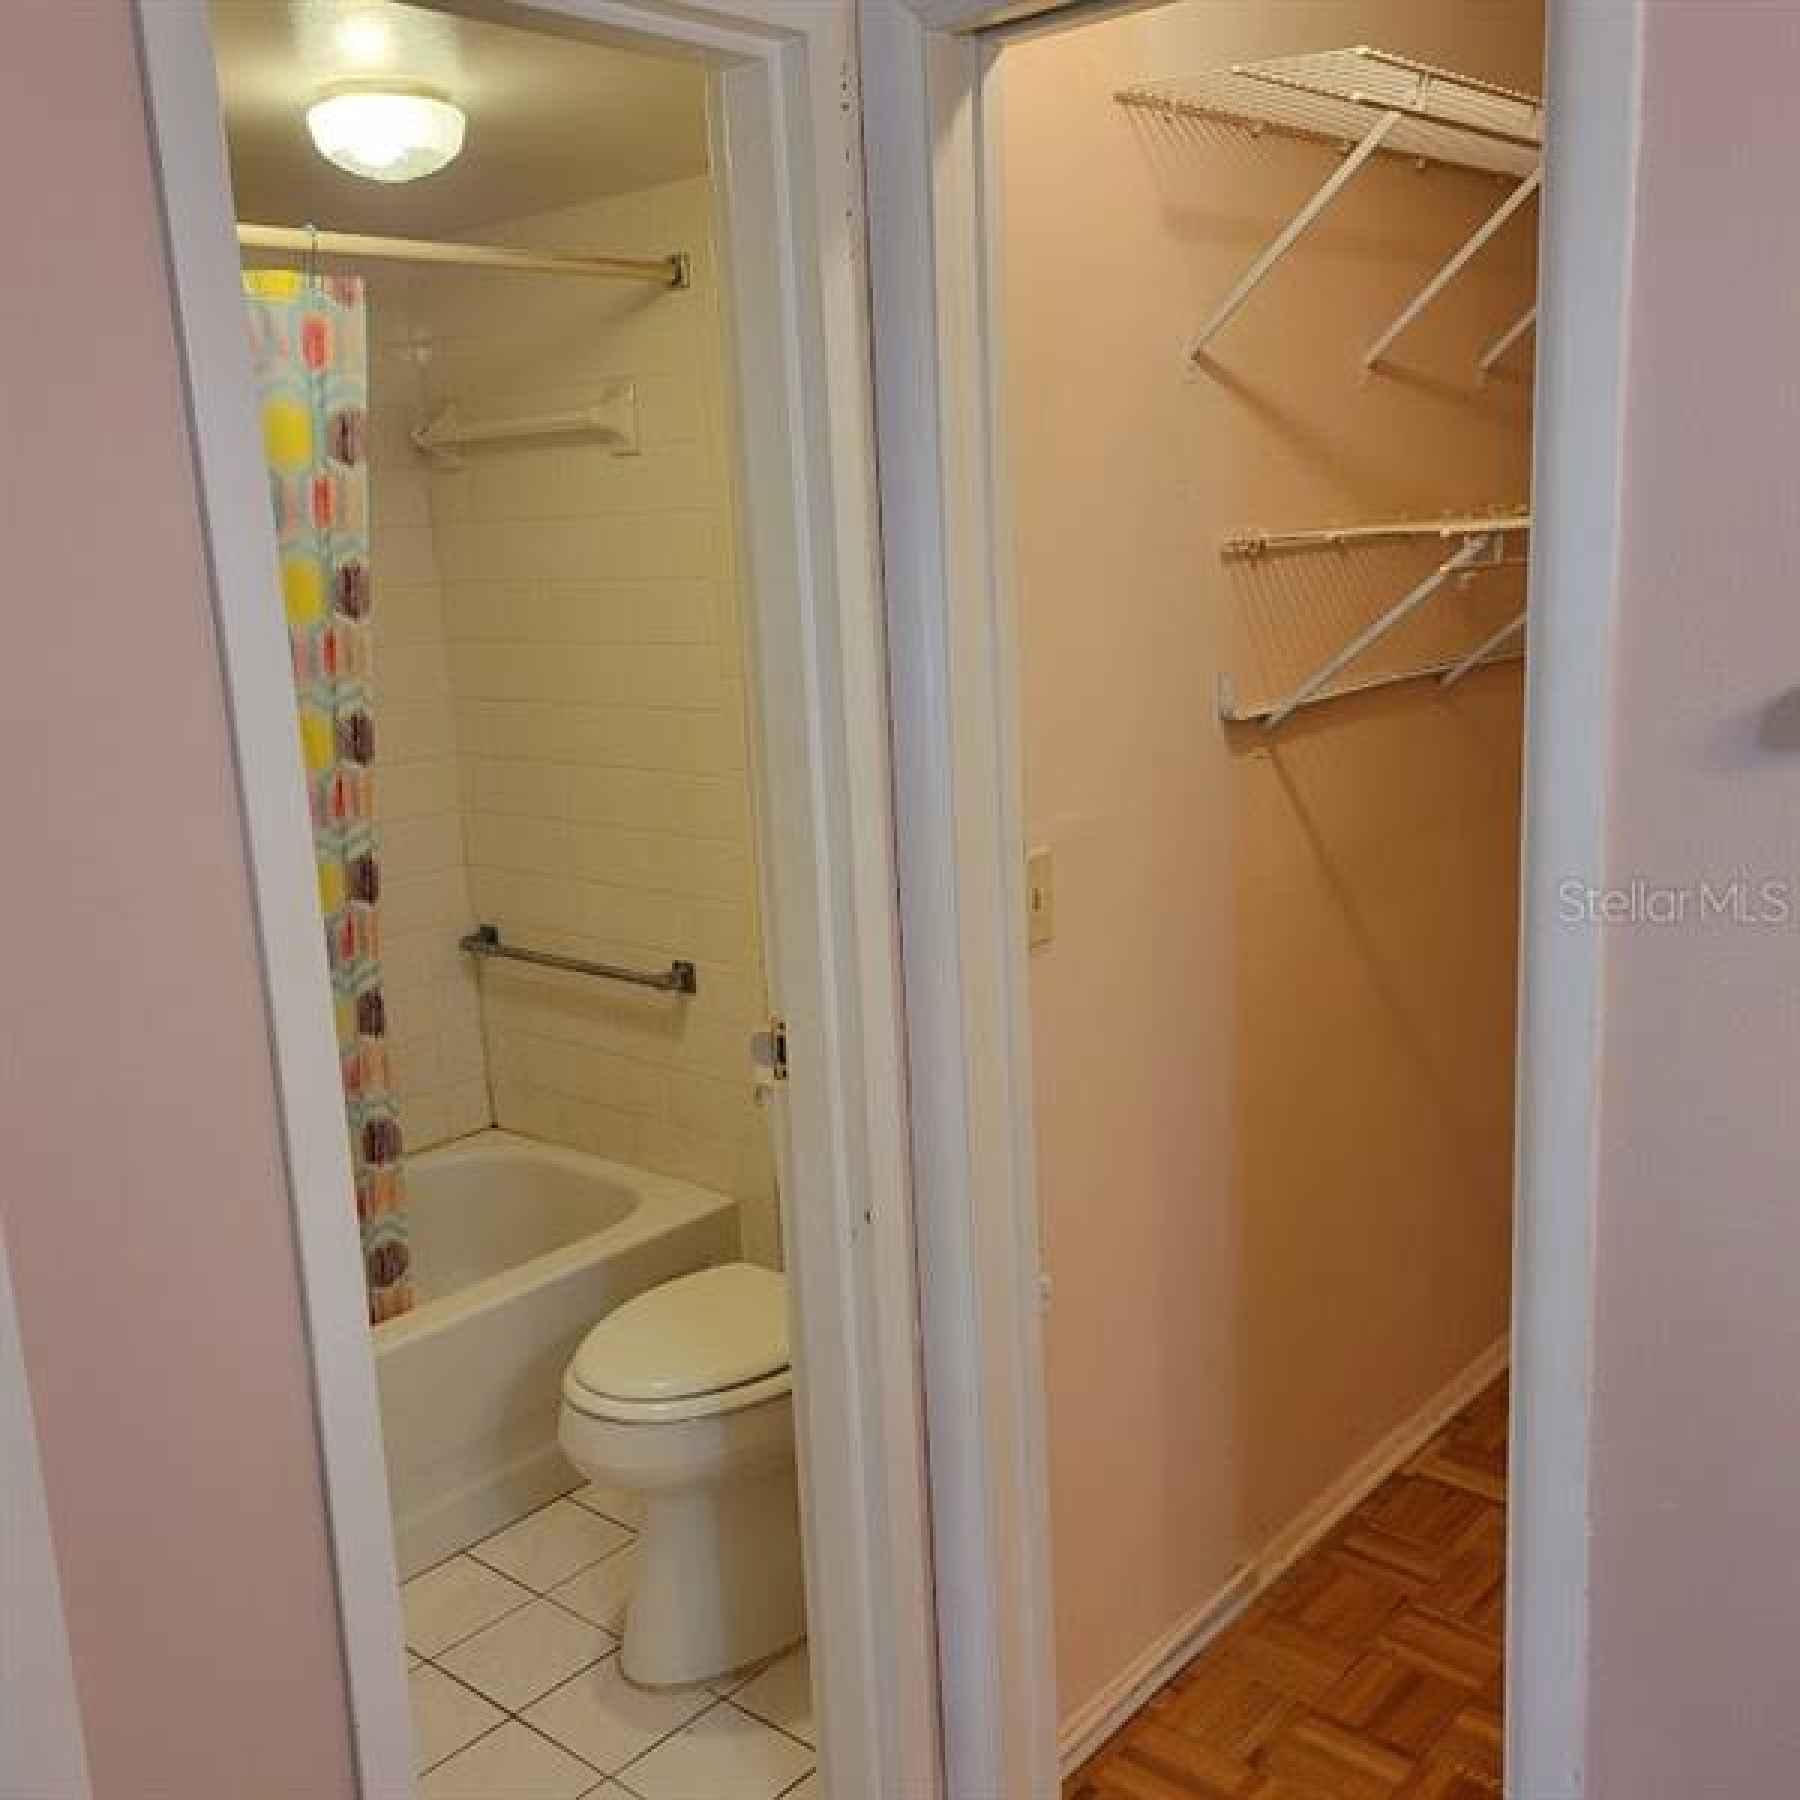 Tub/Shower and toilet area